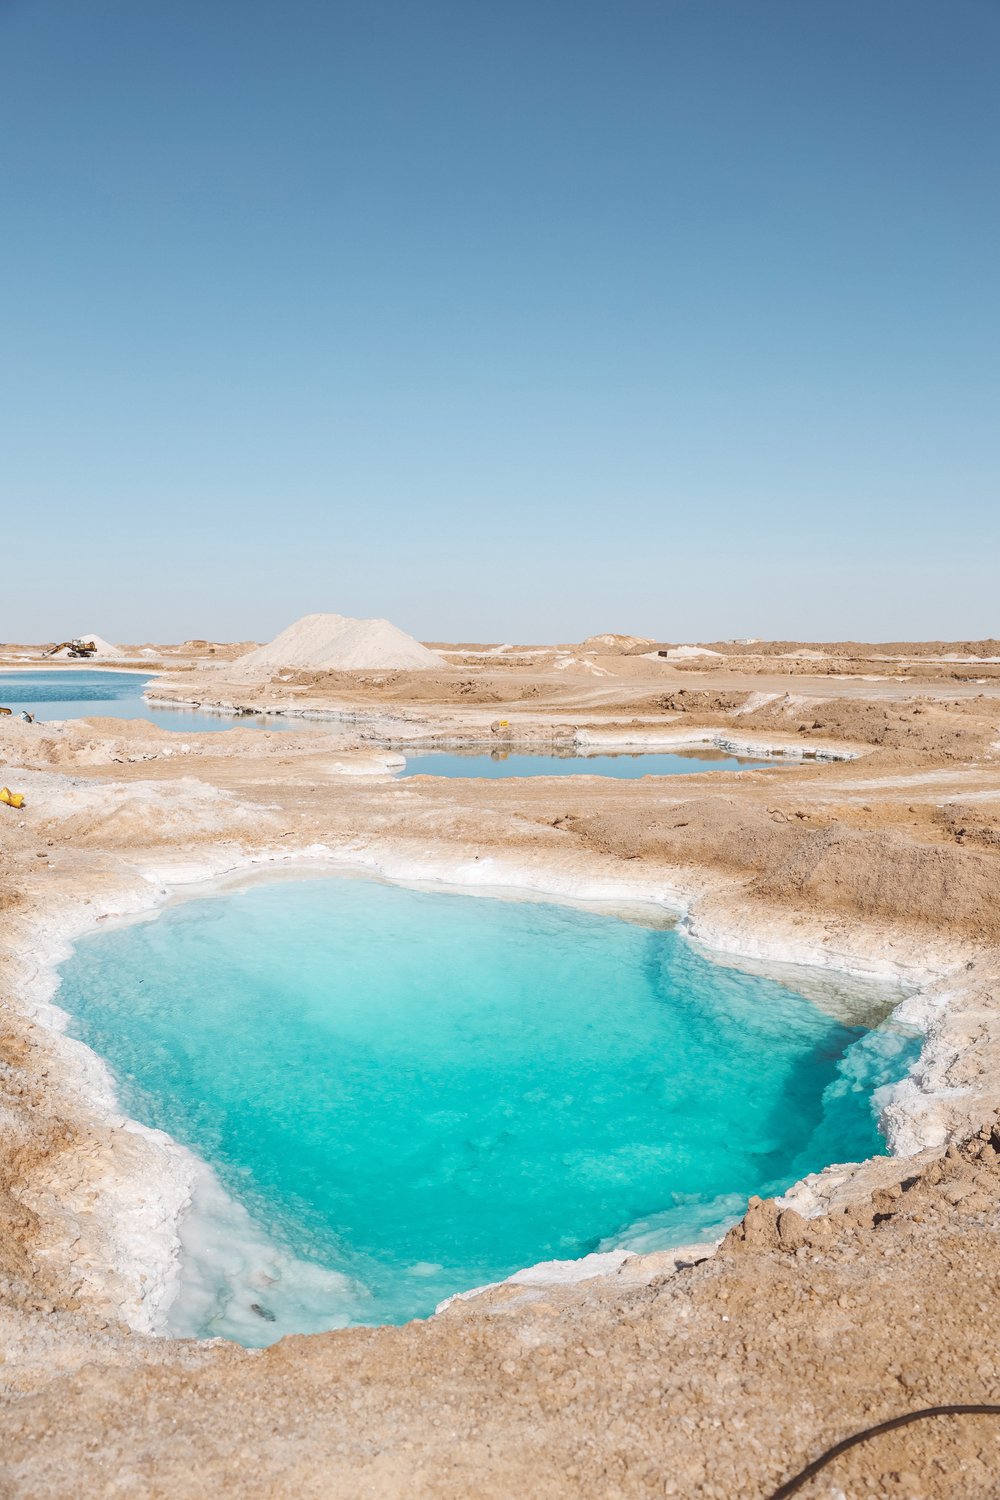 Don't know which one to swim in - Siwa Salt Lakes - Siwa Oasis - Egypt